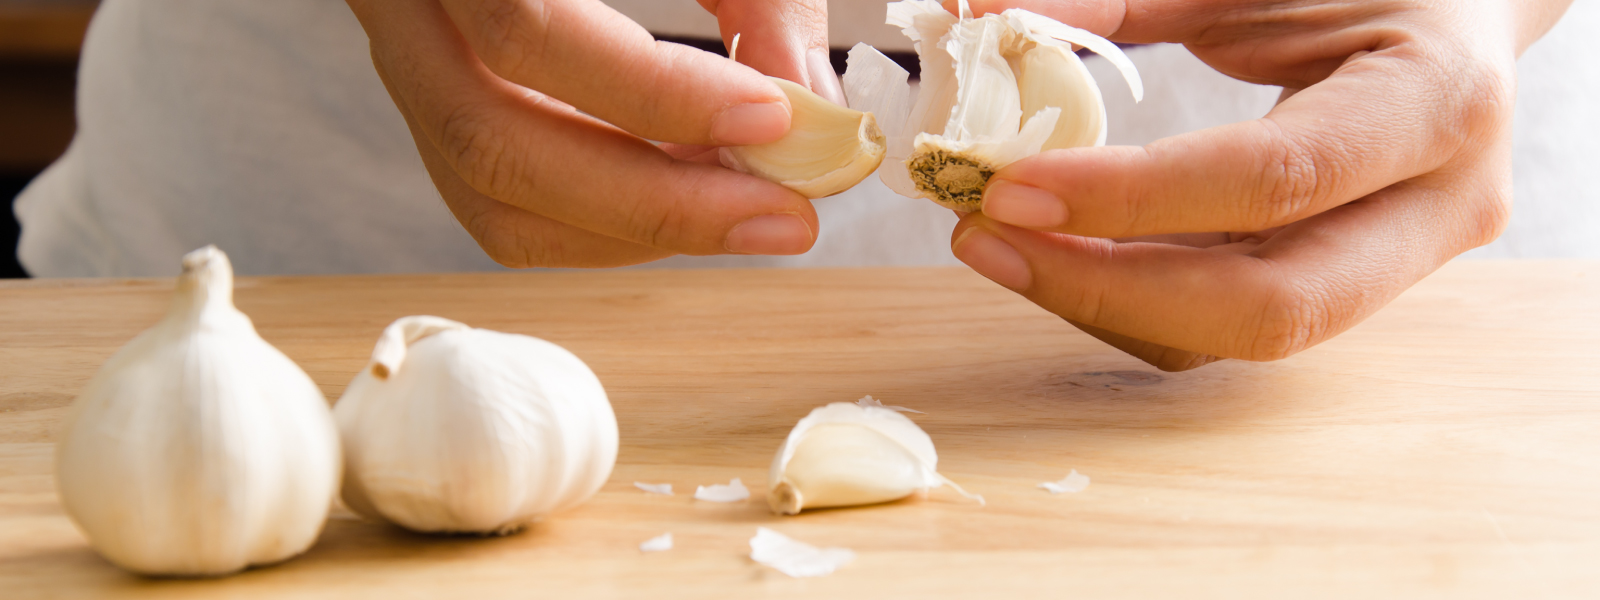 Two hands separating garlic cloves